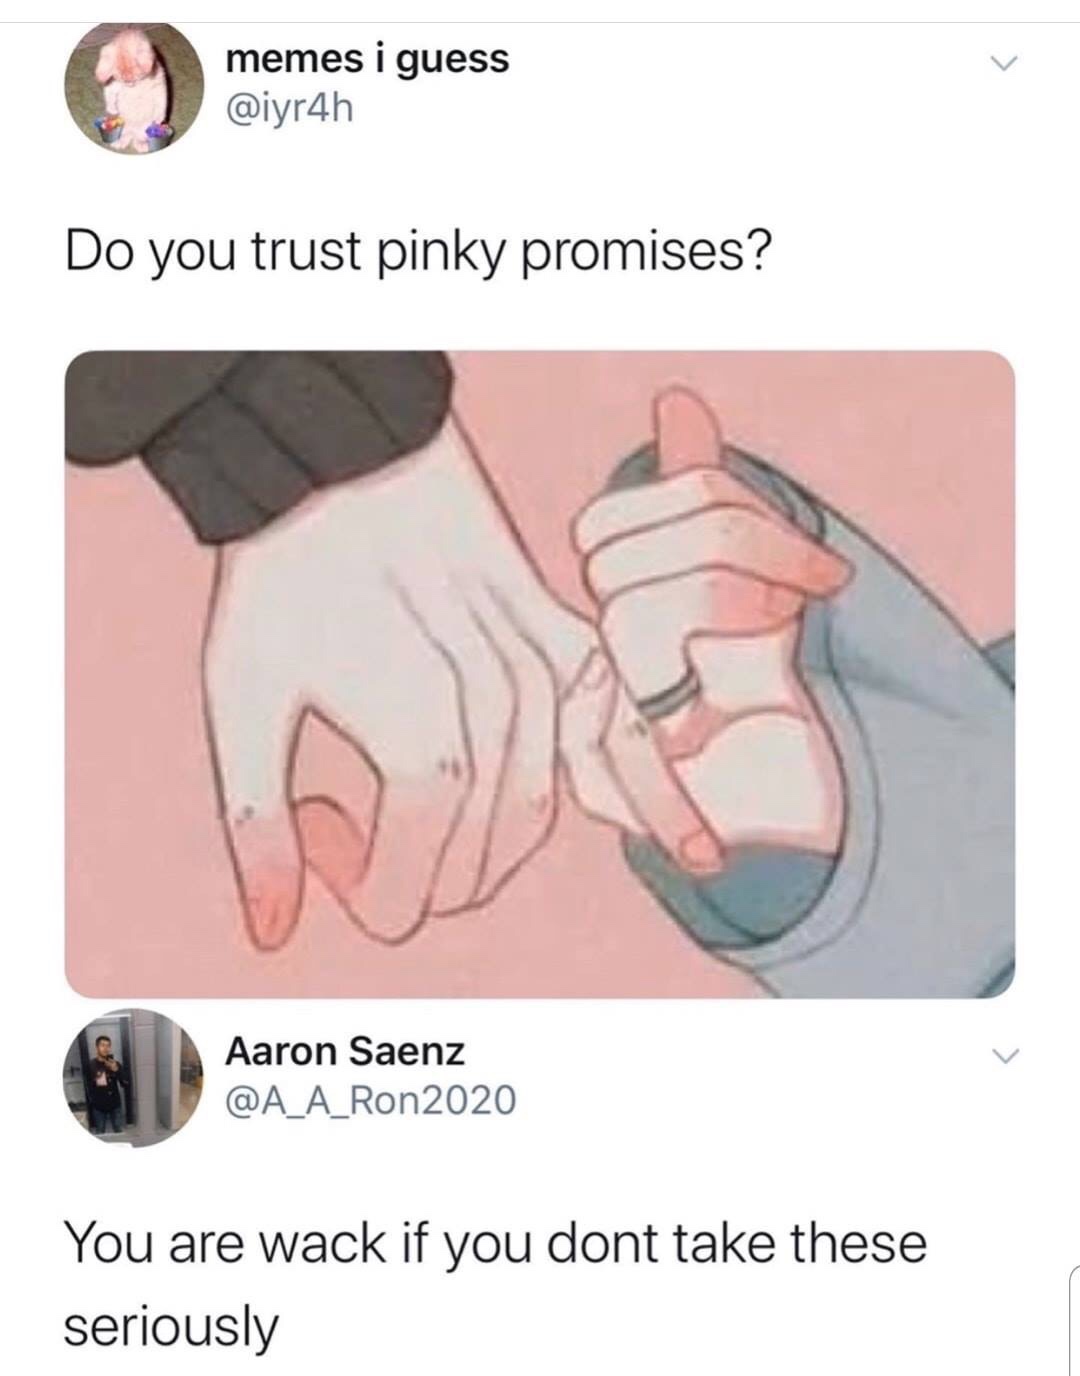 anime aesthetic twitter header - memes i guess Do you trust pinky promises? Aaron Saenz You are wack if you dont take these seriously